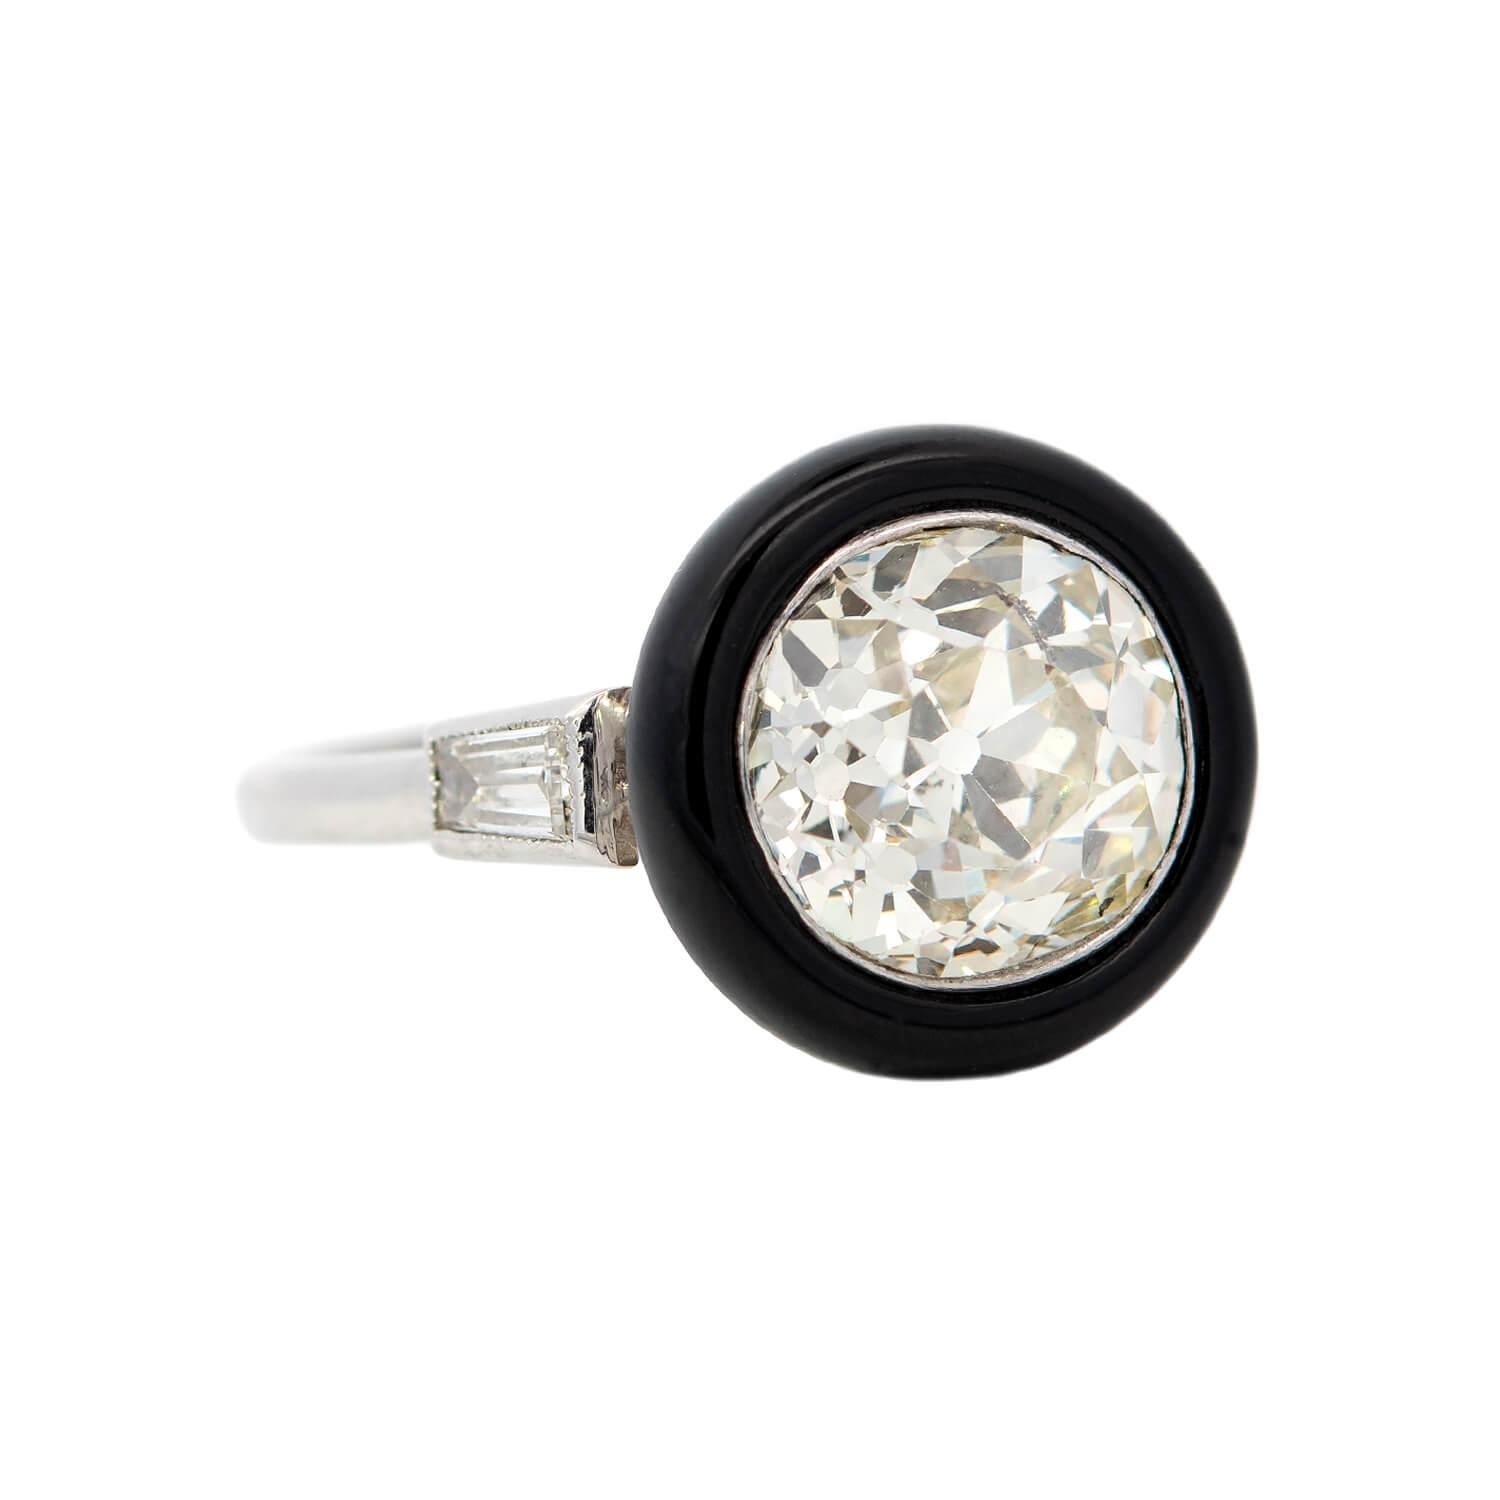 A striking ring from the Art Deco (ca1930s) era! Crafted in platinum, this ring adorns an old Mine Cut diamond within a bezel setting. The diamond, weighing approximately 2.46ct in L/M color and SI2 clarity, is set in a deep black onyx halo,